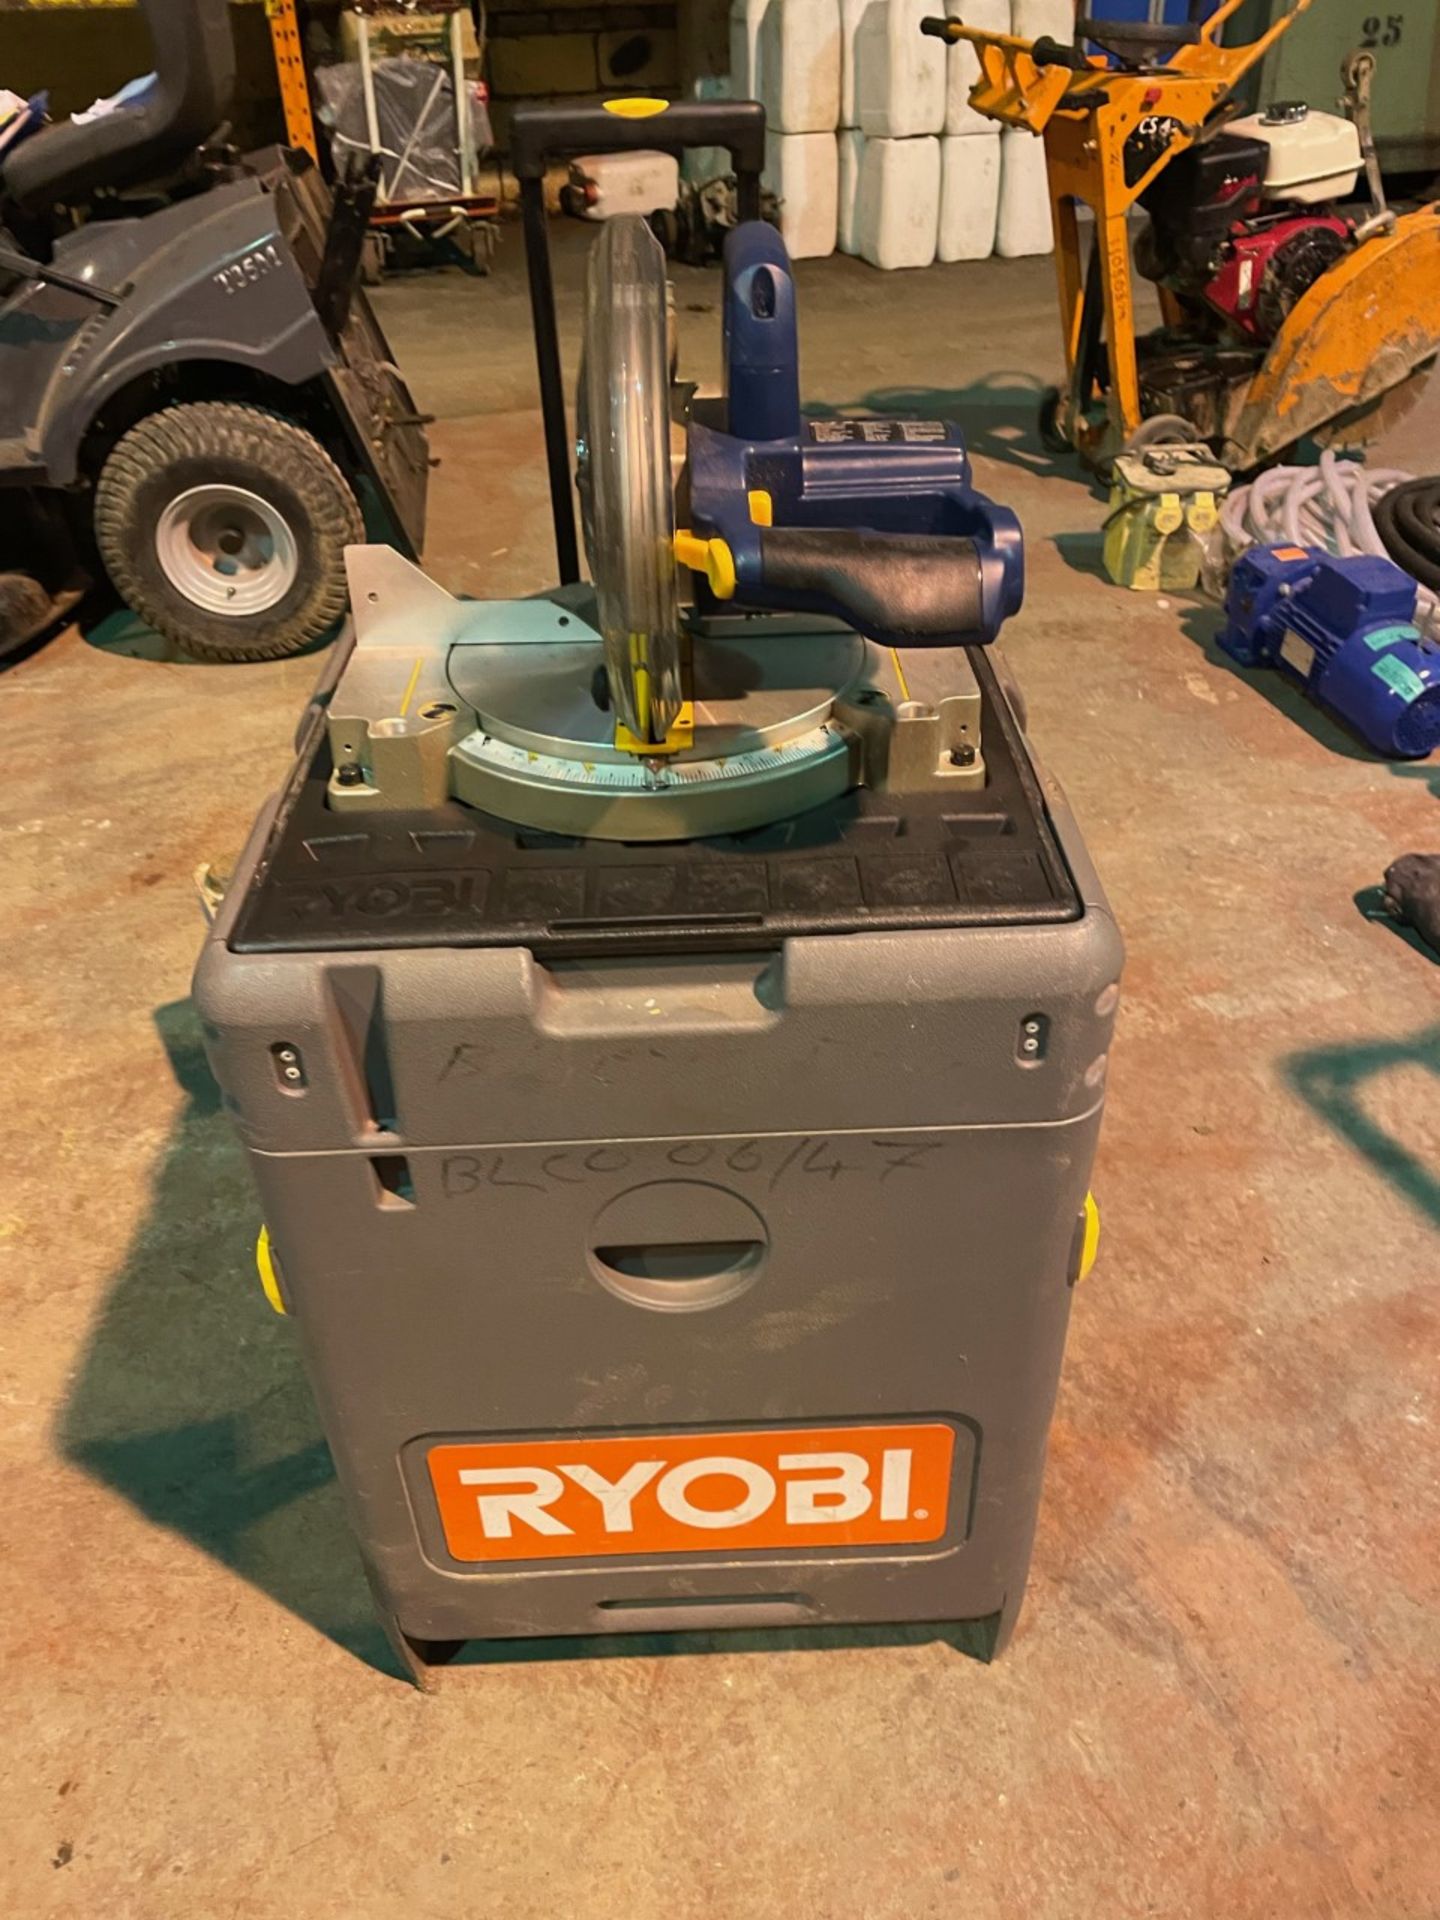 Ryobi 18v mitre saw on portable workstation. No batteries included. Saw is nearly new.